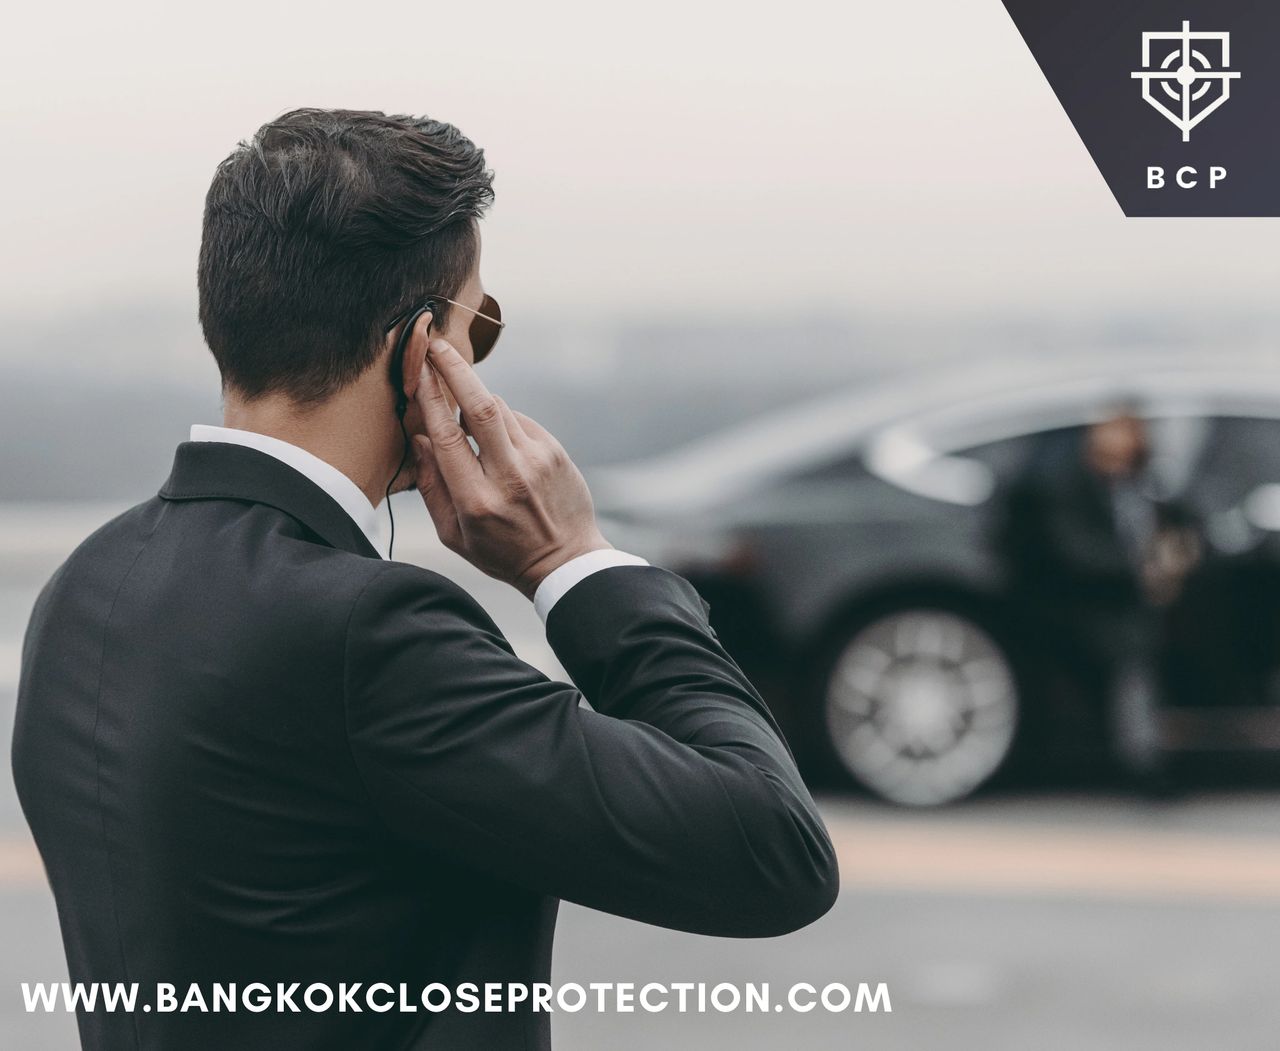 https://img1.wsimg.com/isteam/ip/c02797f1-fdba-4d3e-8e5d-0c0d99350f49/Bangkok-close-protection-02.png/:/cr=t:0%25,l:0%25,w:100%25,h:100%25/rs=w:1280